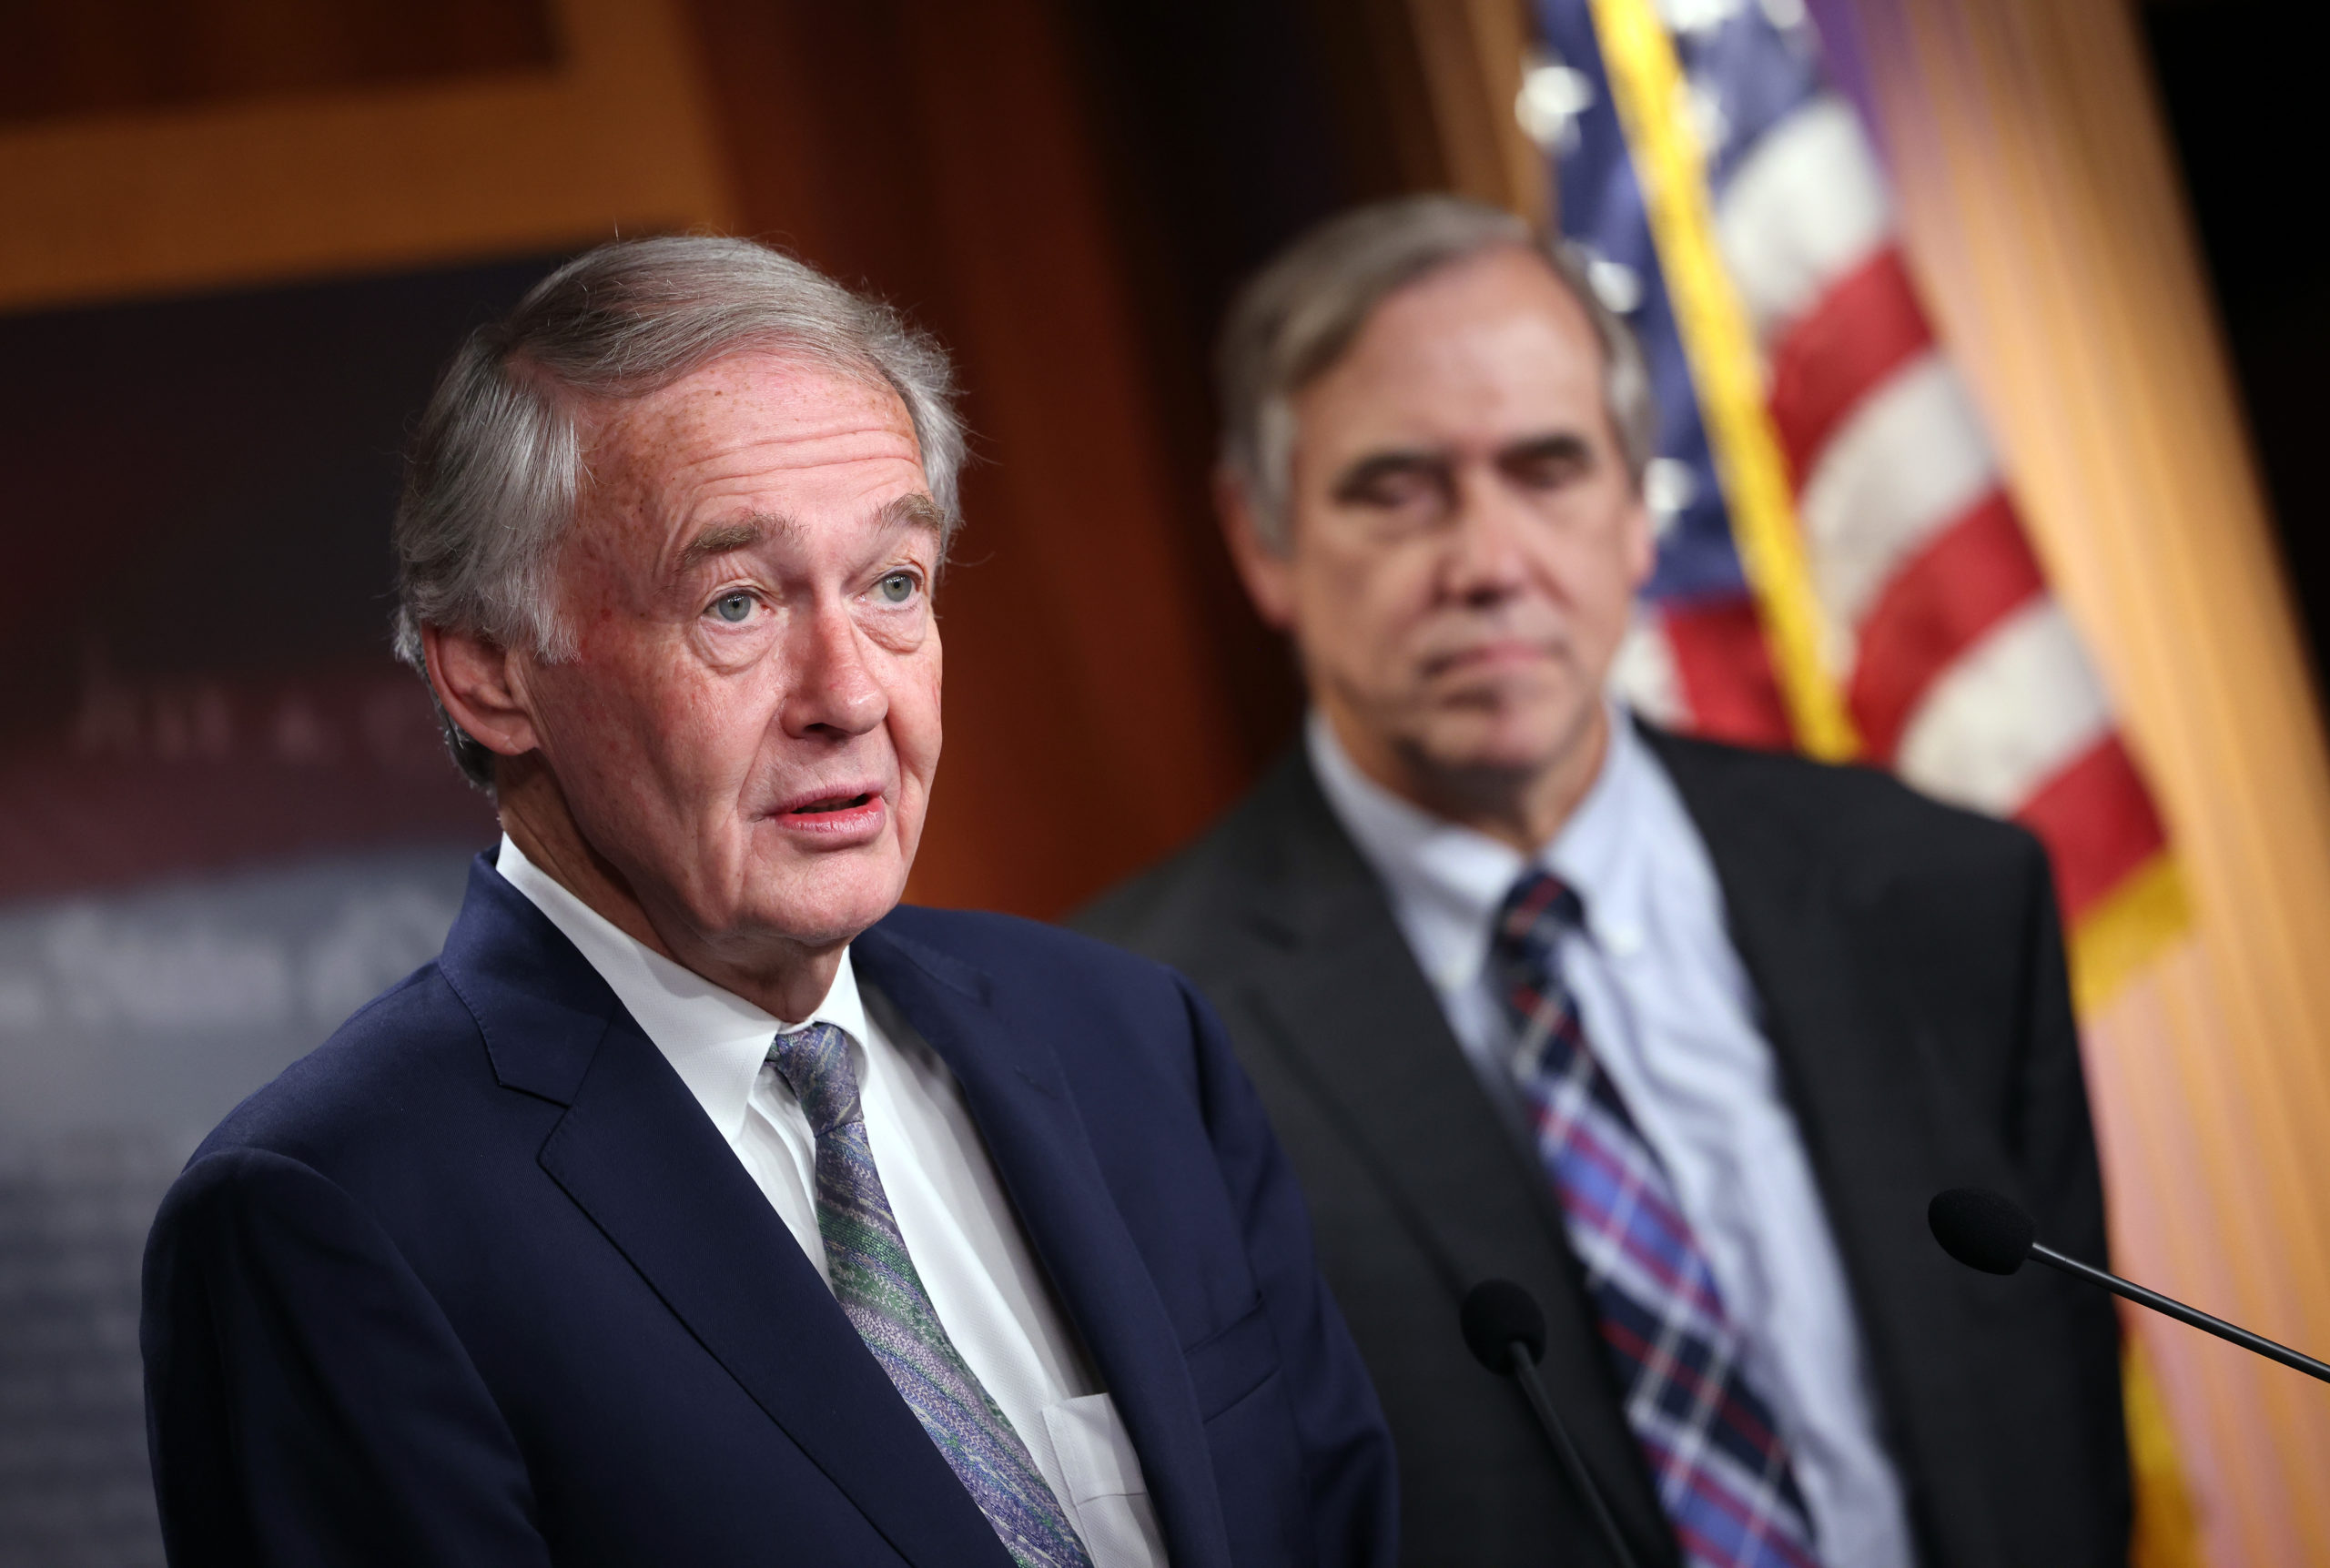 Sen. Ed Markey, the sponsor of the Senate version of the bill, speaks during a press conference Tuesday. (Kevin Dietsch/Getty Images)